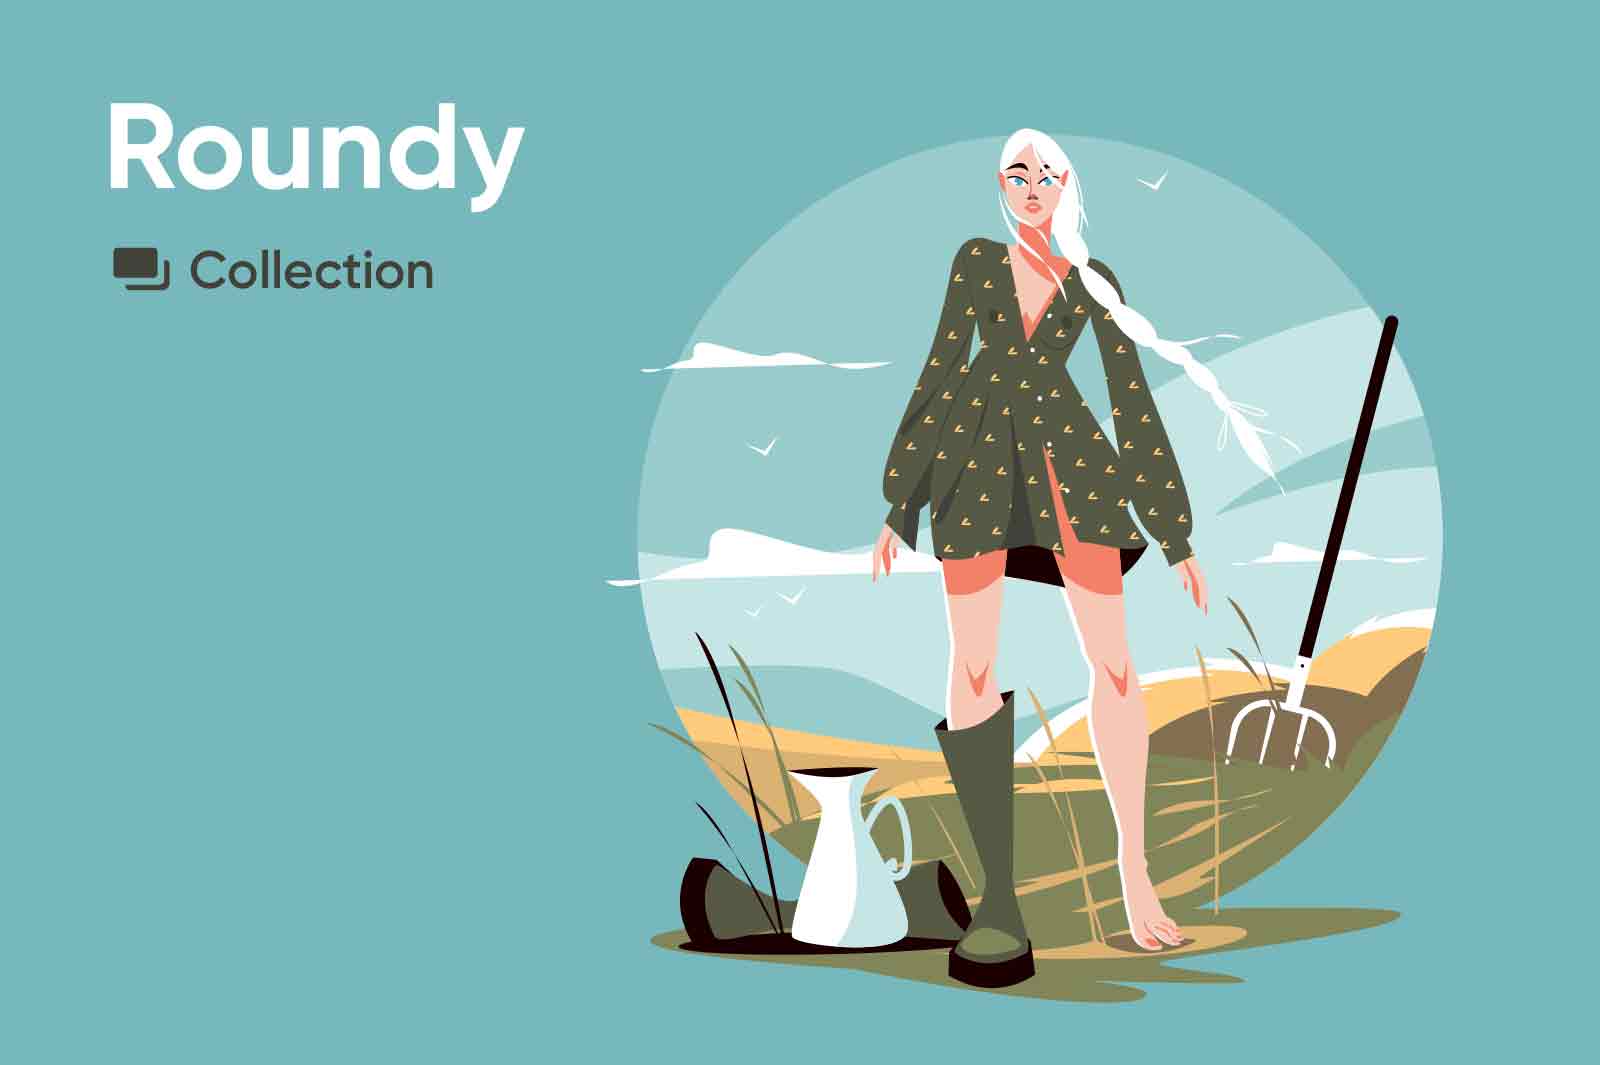 Roundy illustrations Collection. Vector character illustrations.